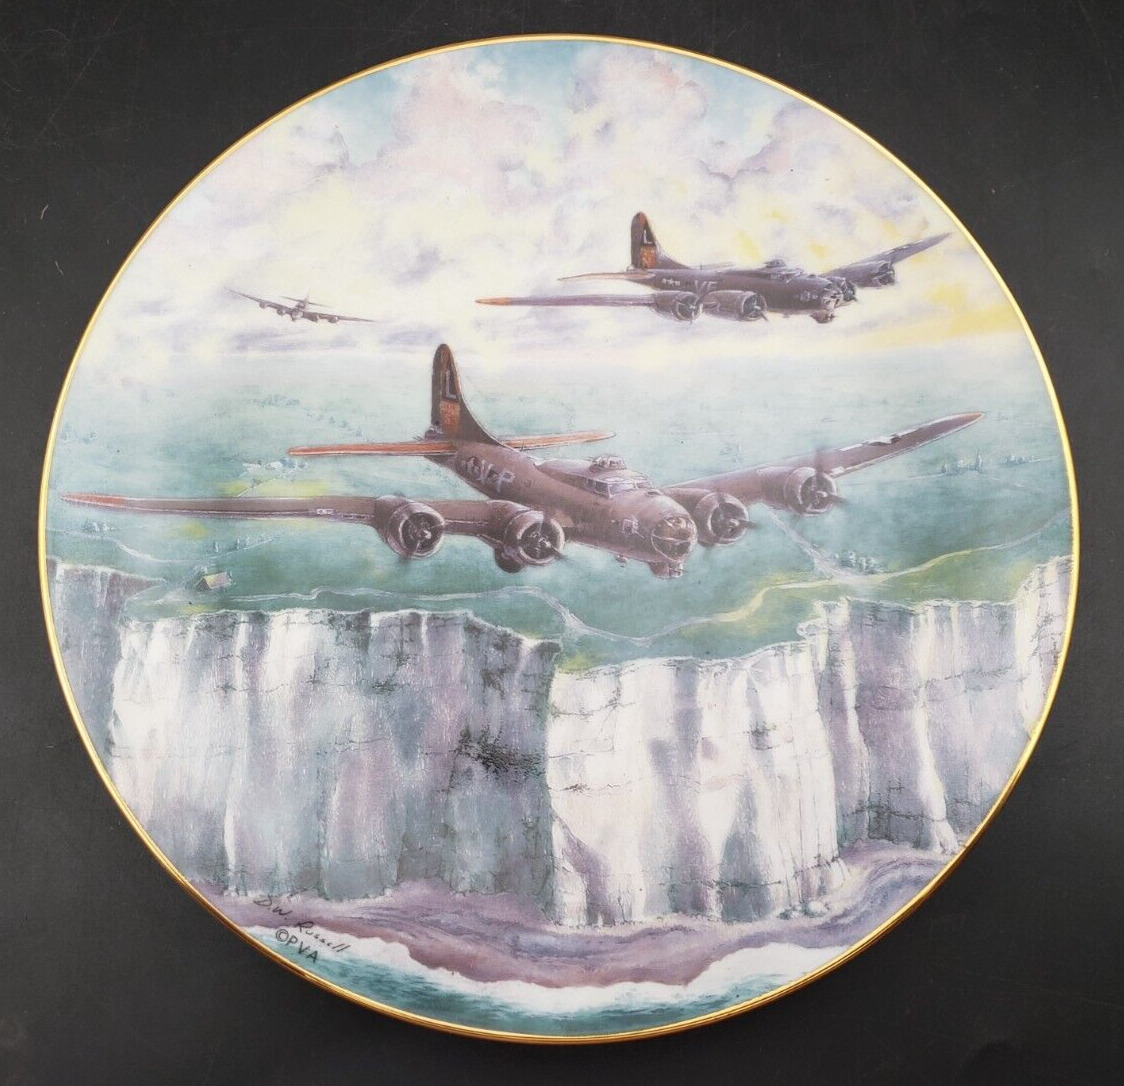 Paralyzed Veterans of America PVA Sortie at Dawn Collectible Plate WWII B-17